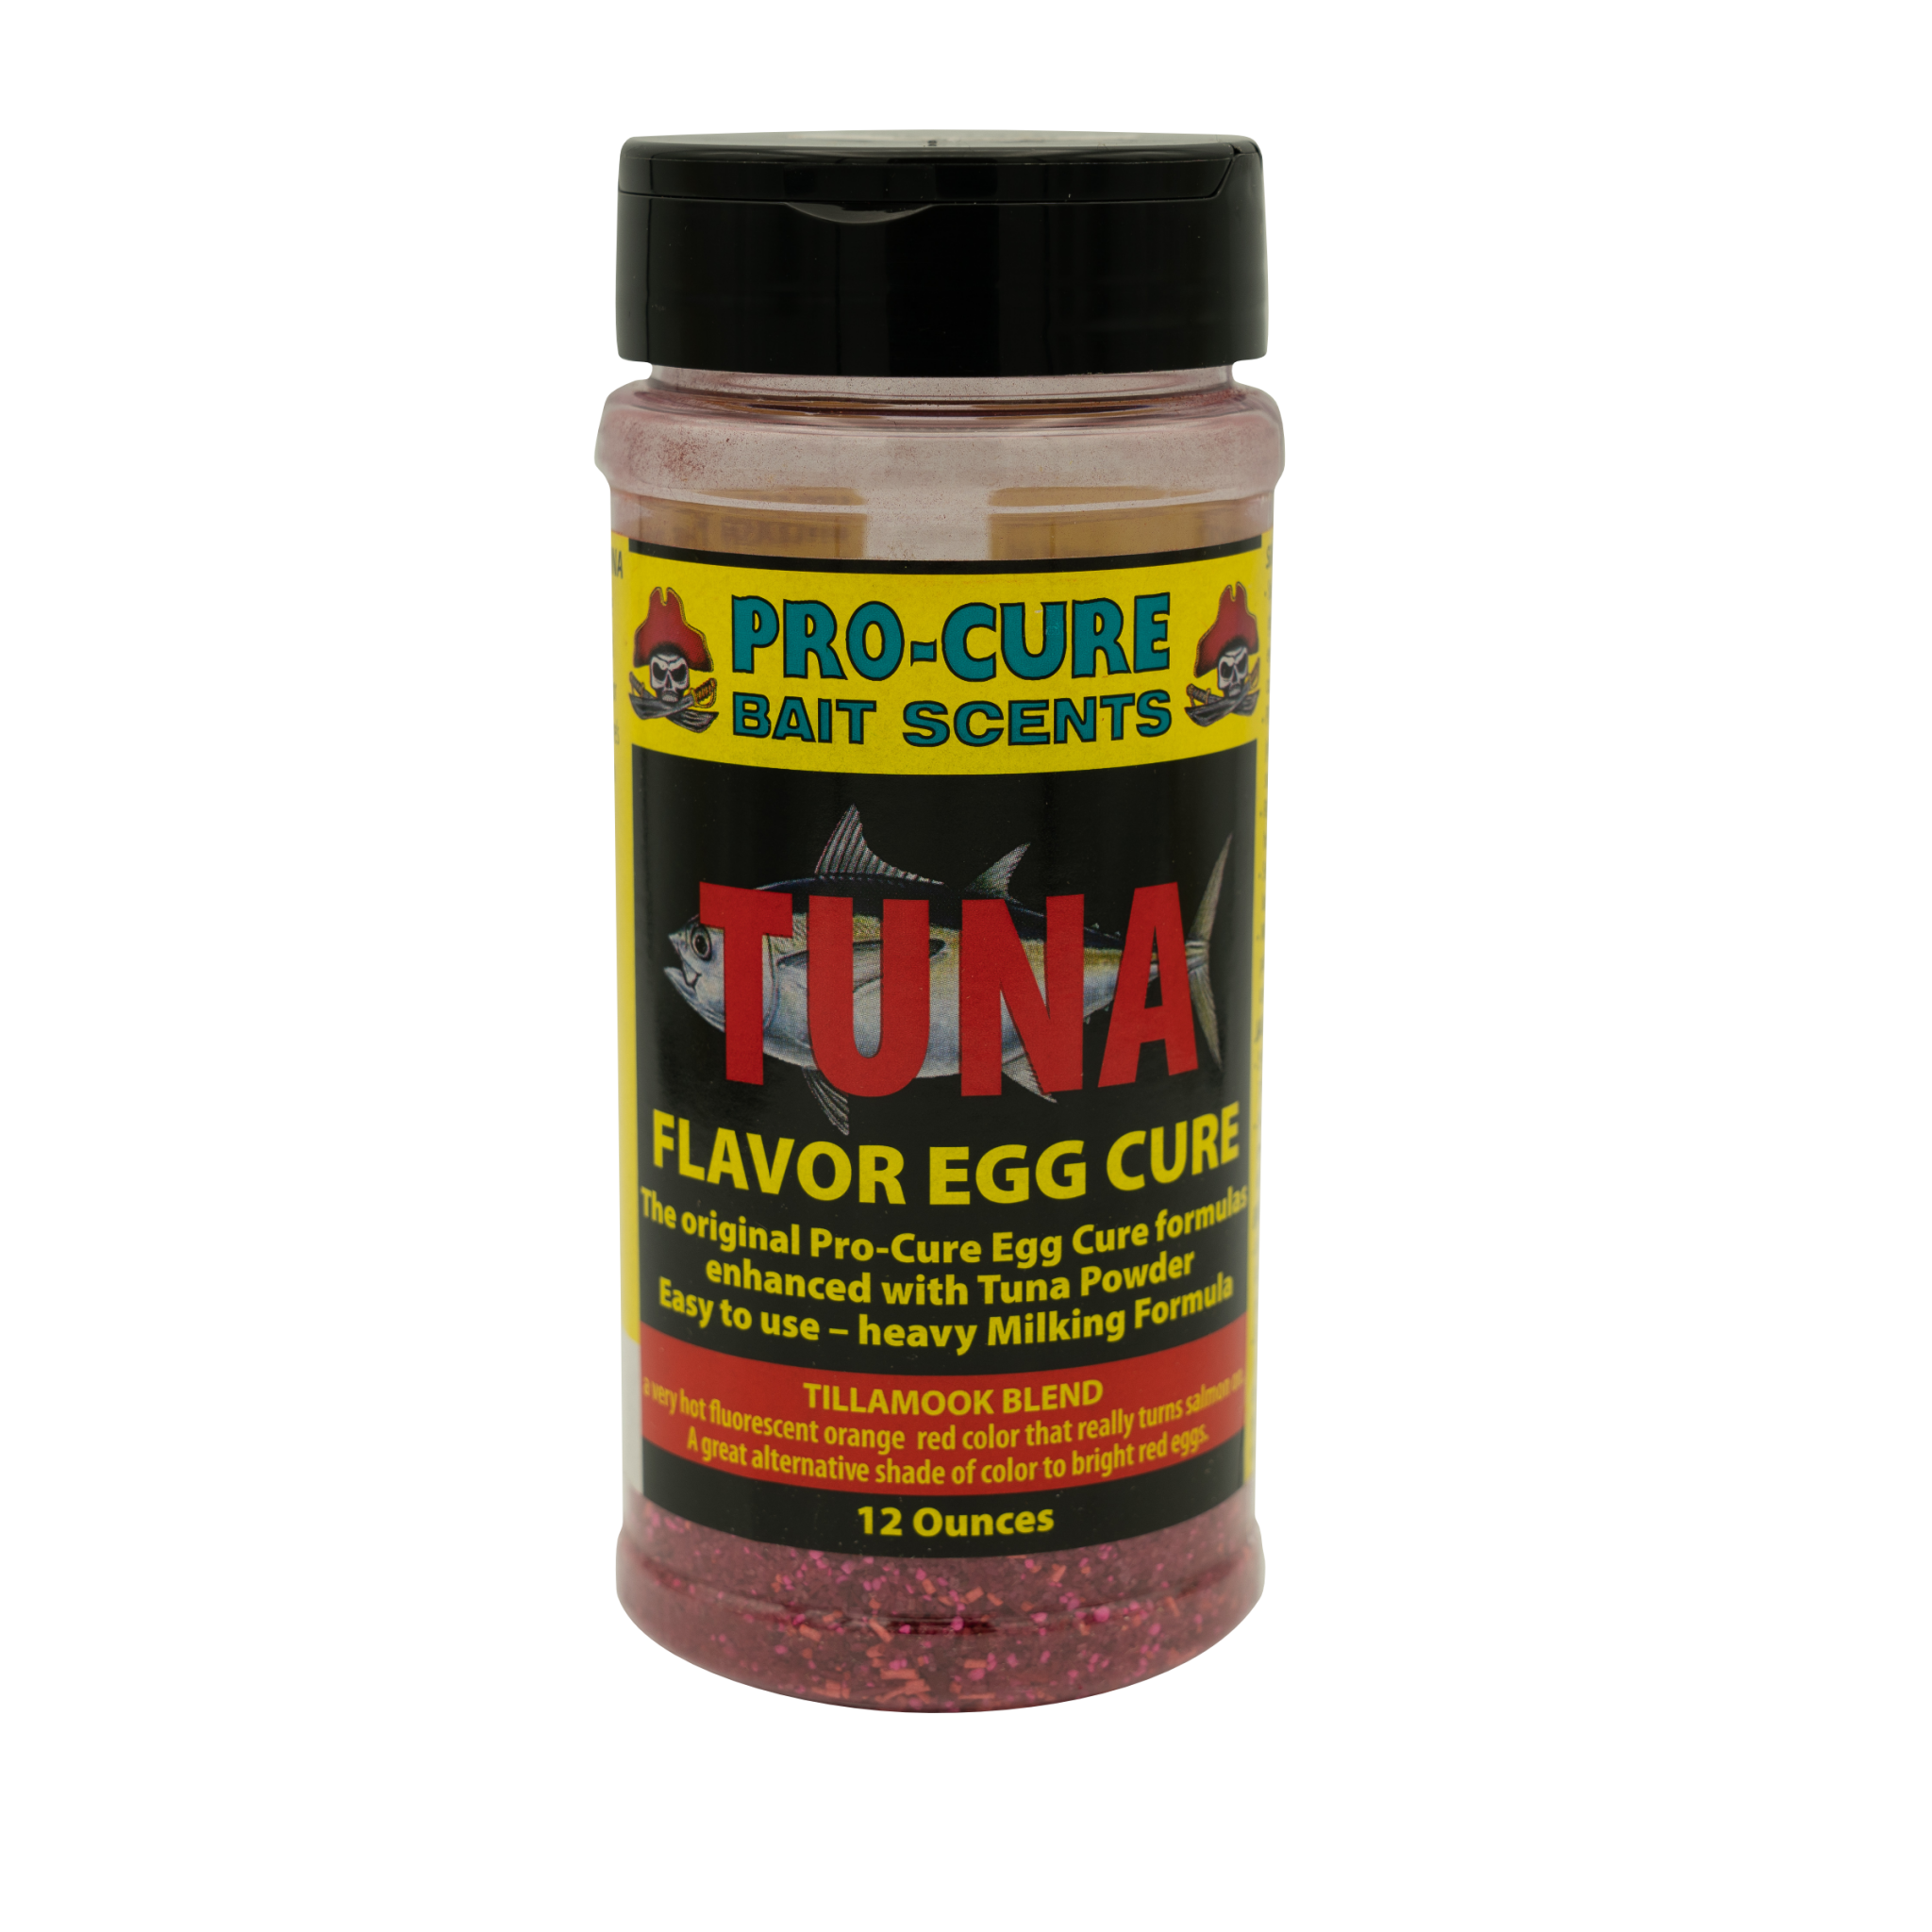 https://mcproductimages.s3-us-west-2.amazonaws.com/pro-cure/tuna-flavor-egg-cures/PC-egg-cure-tuna-tillamook-blend.png